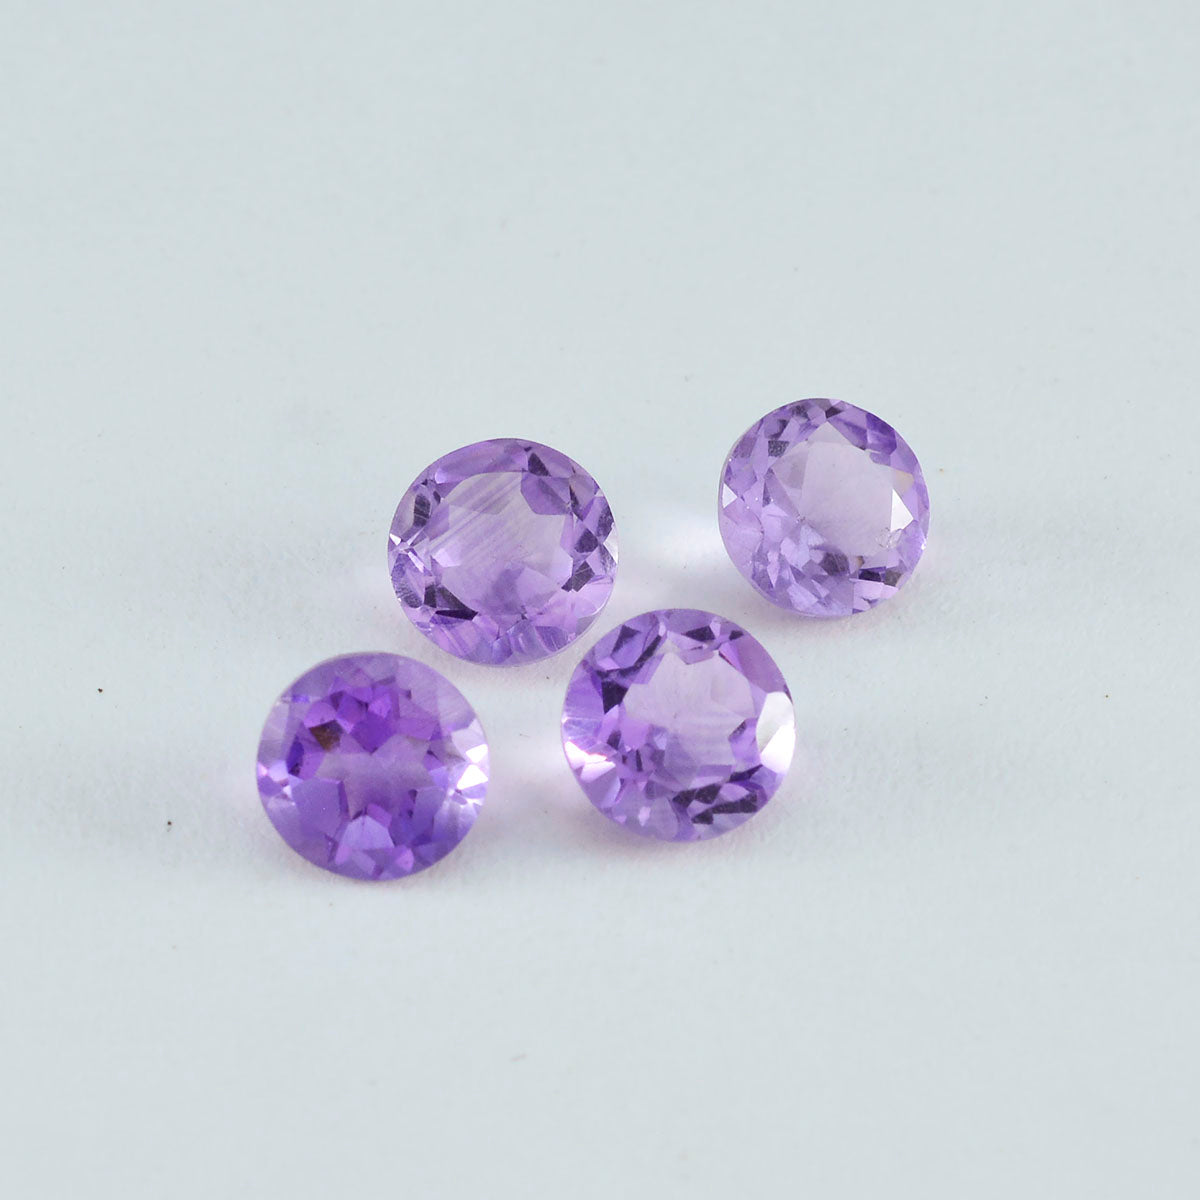 Riyogems 1PC Real Purple Amethyst Faceted 8x8 mm Round Shape beauty Quality Loose Stone